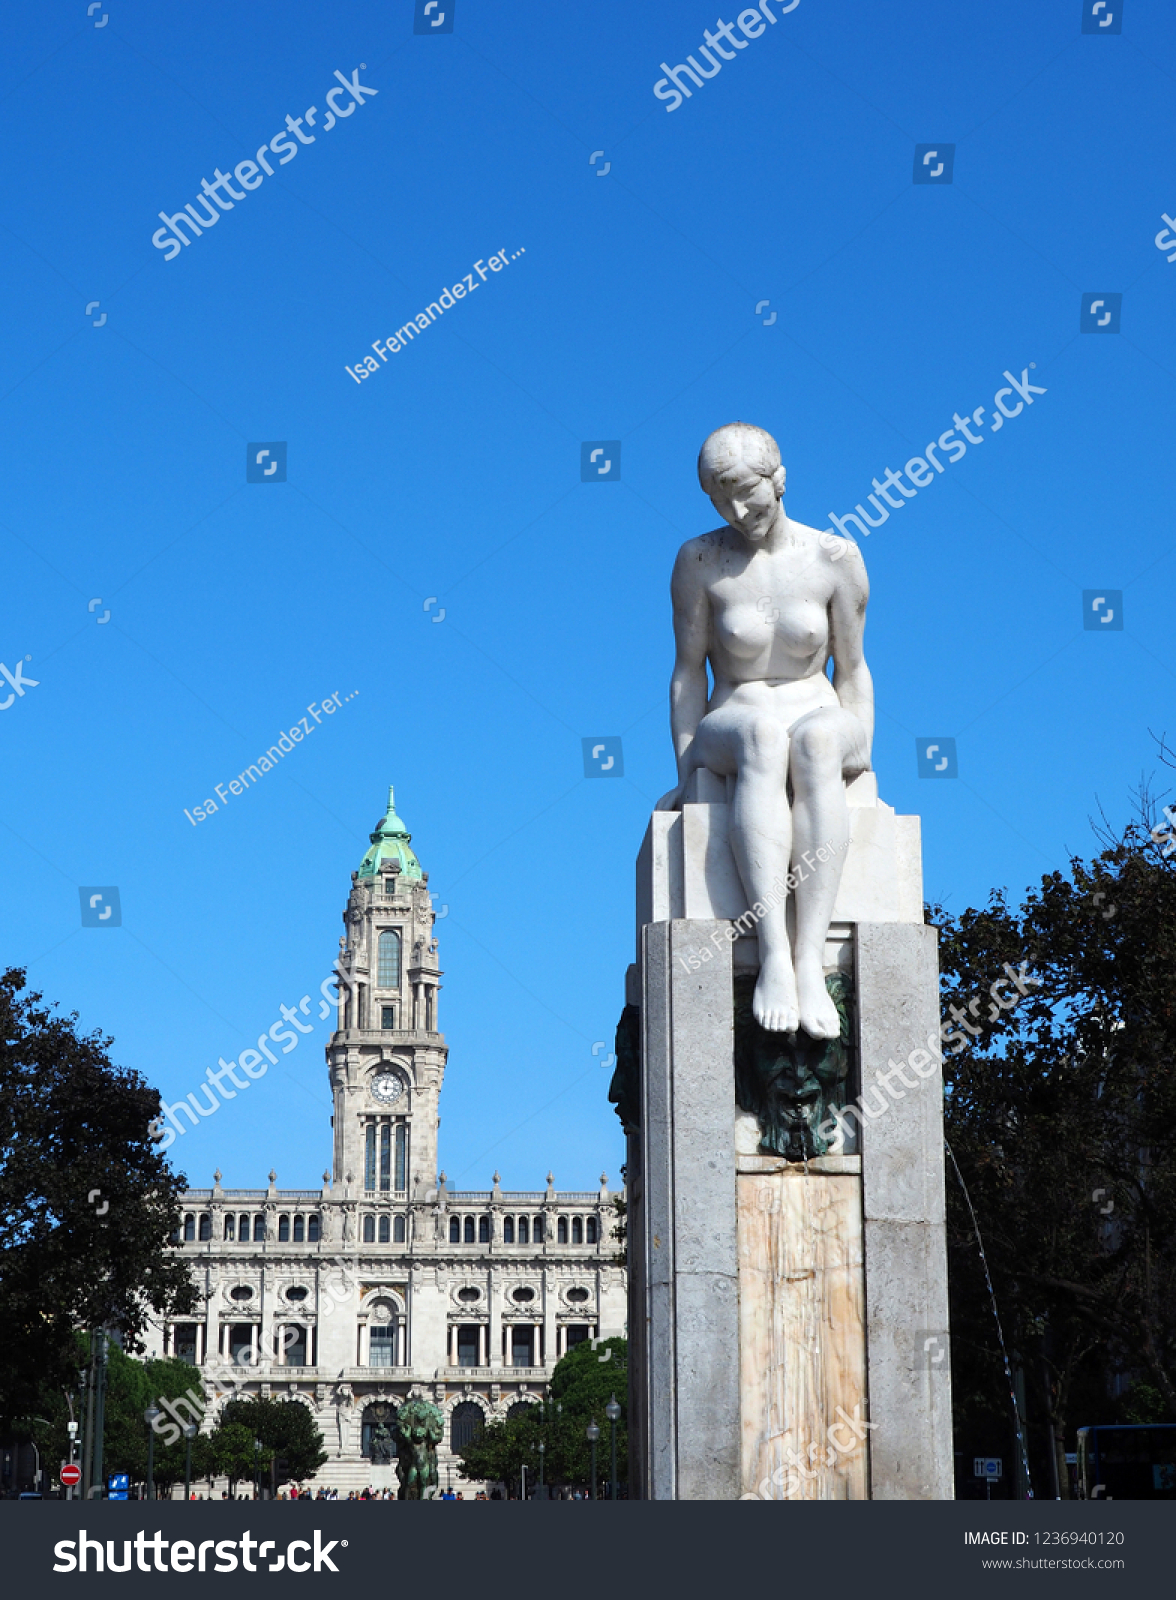 Alegre not in Porto nude woman Best Places